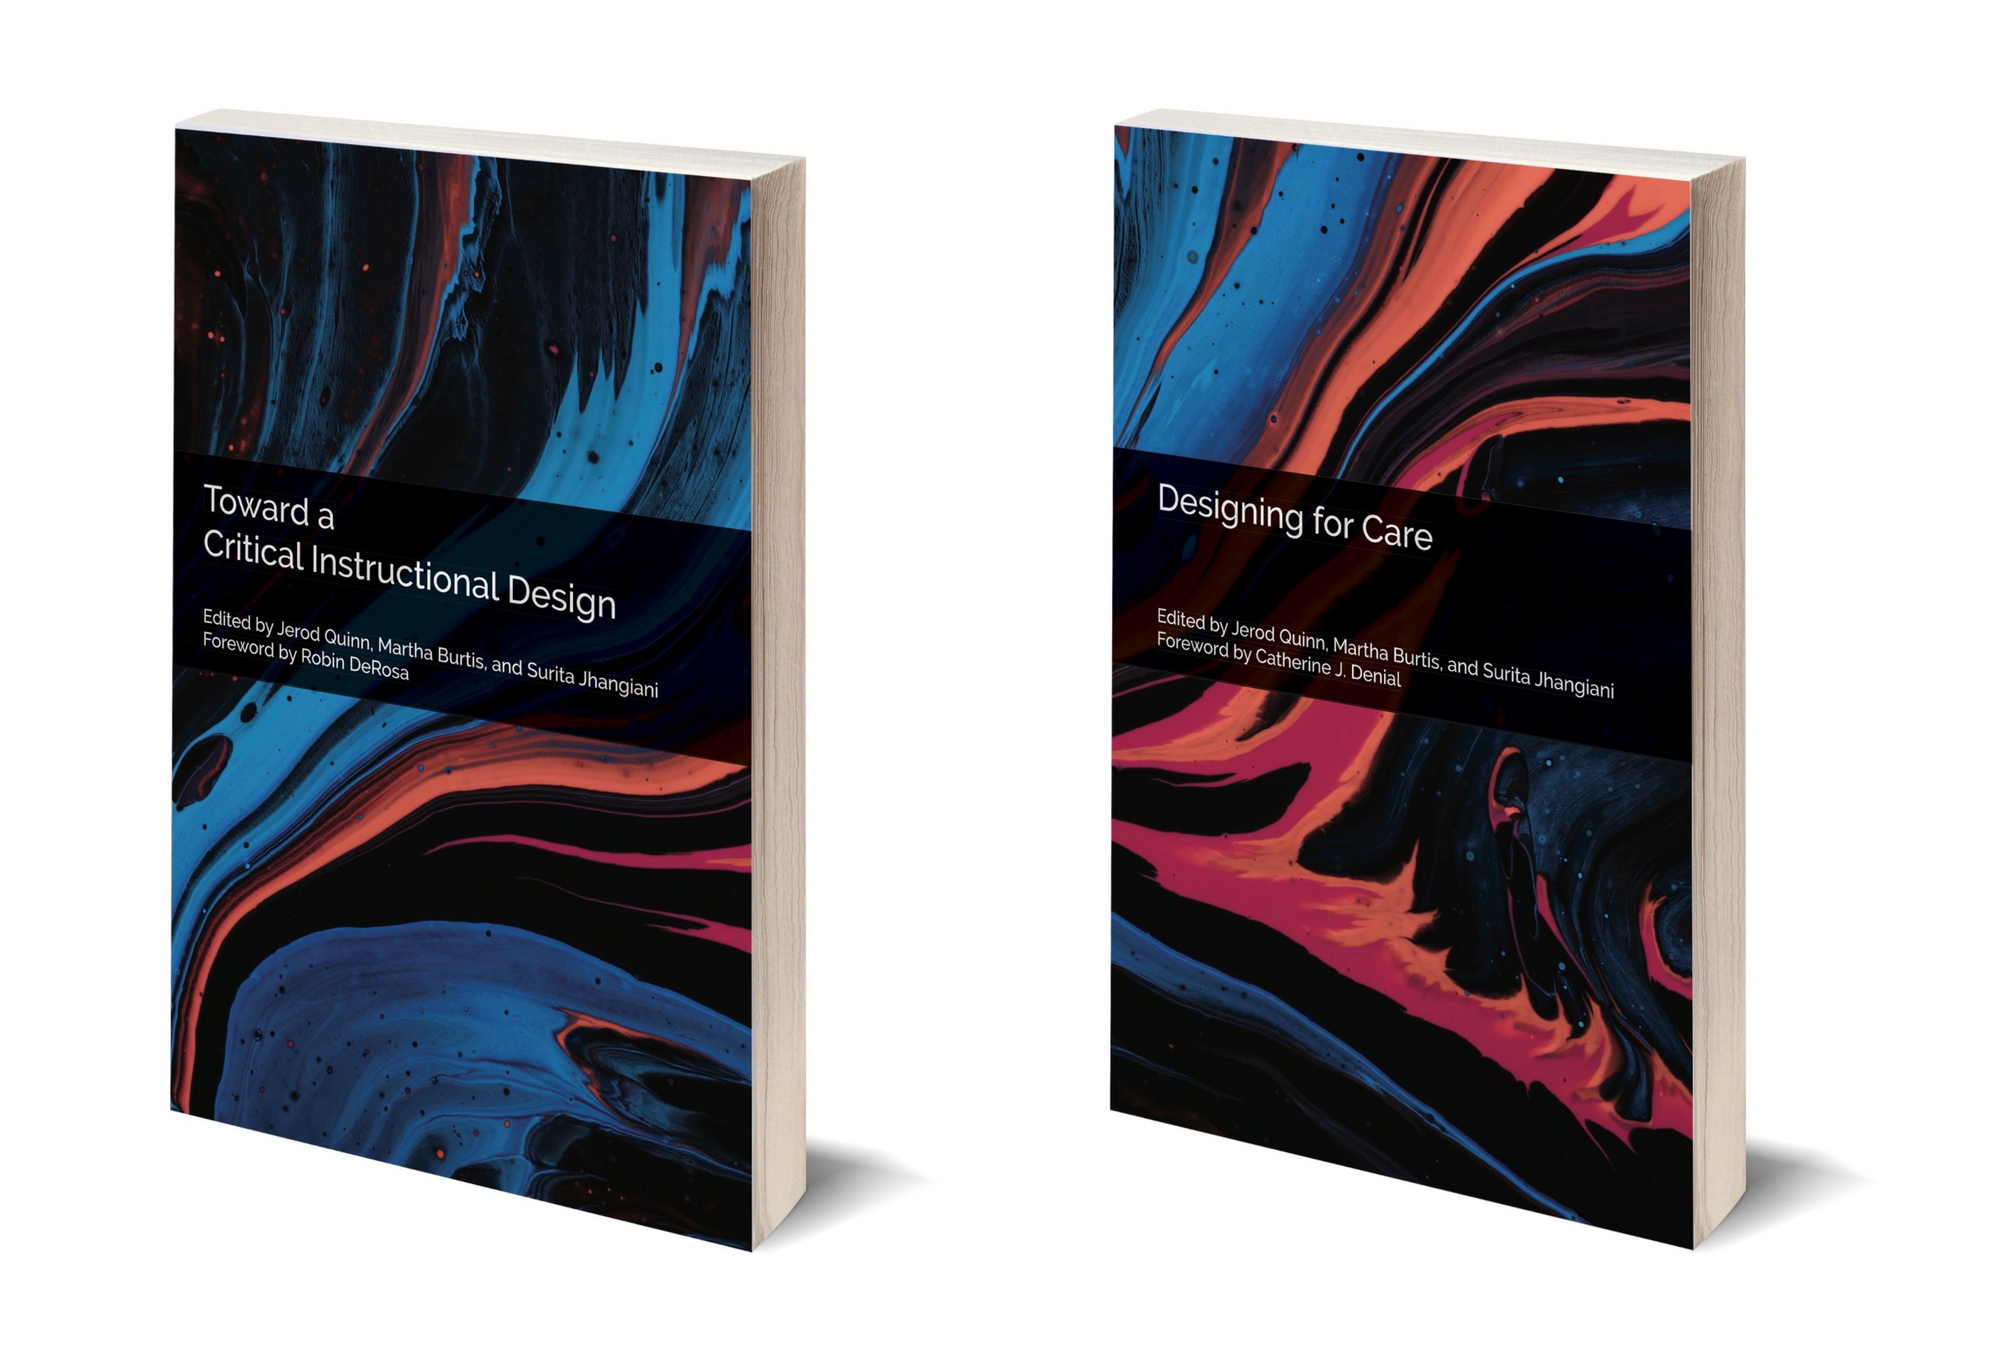 The cover of two books with oil swirled on the front cover designs